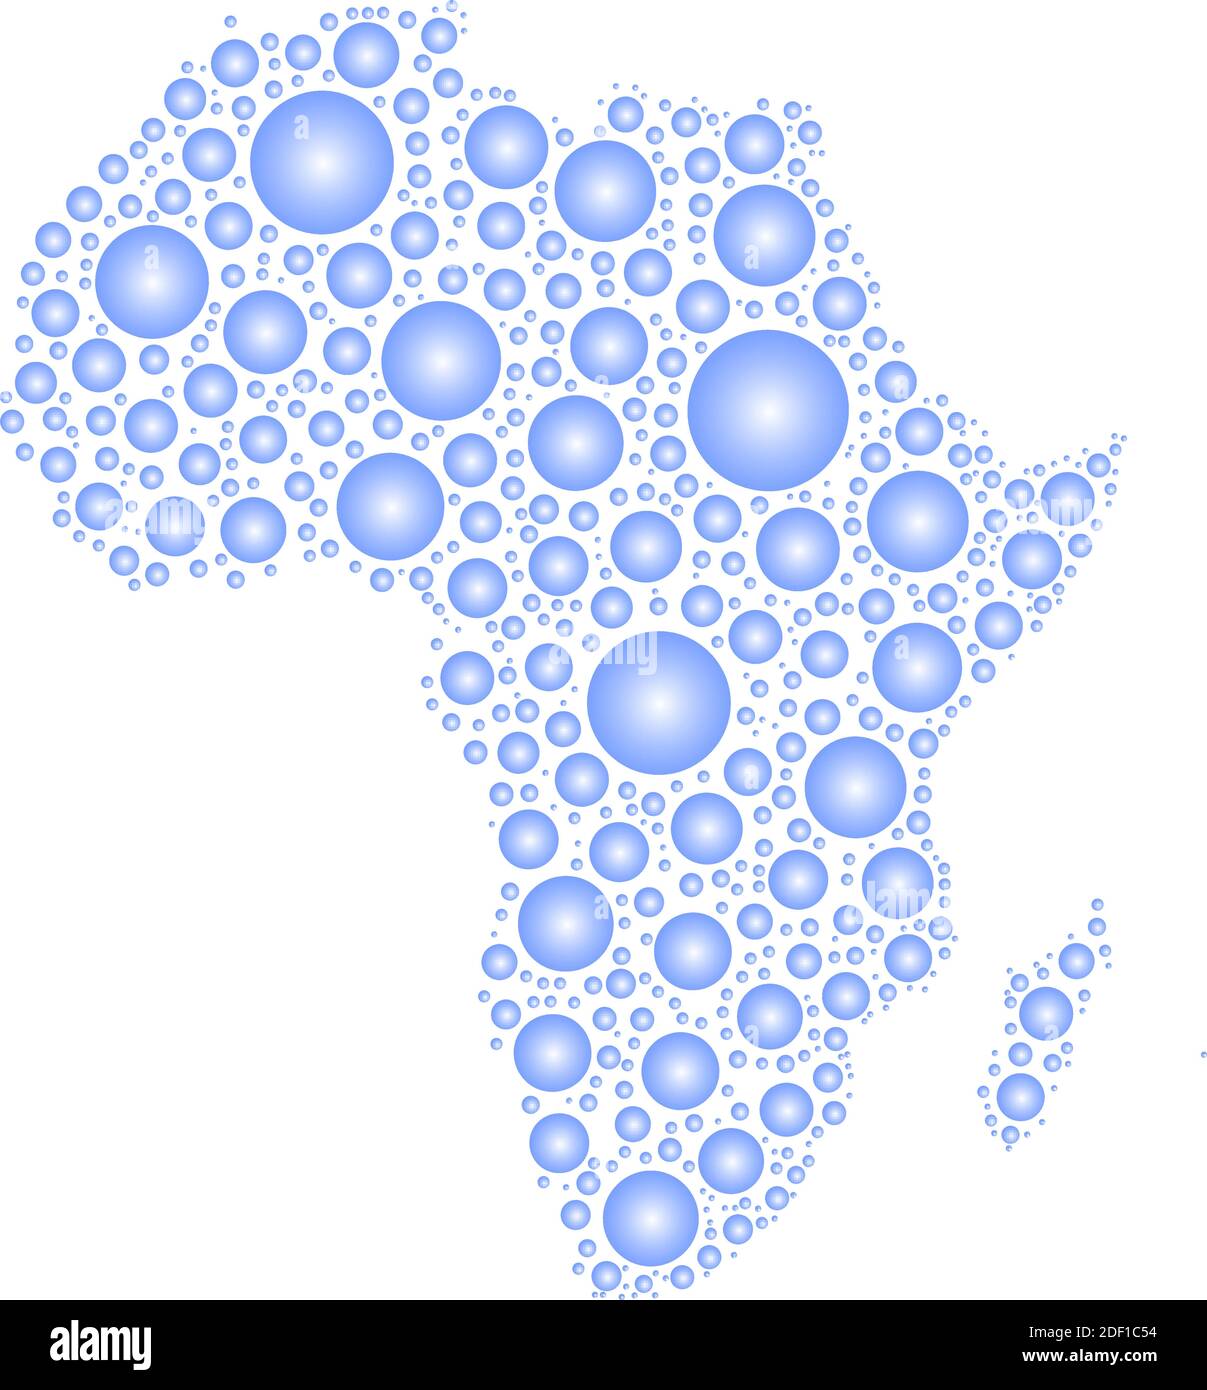 Silhouette of Africa continent. Mosaic of blue rounded rain drops on white background. Vector map illustration. Stock Vector